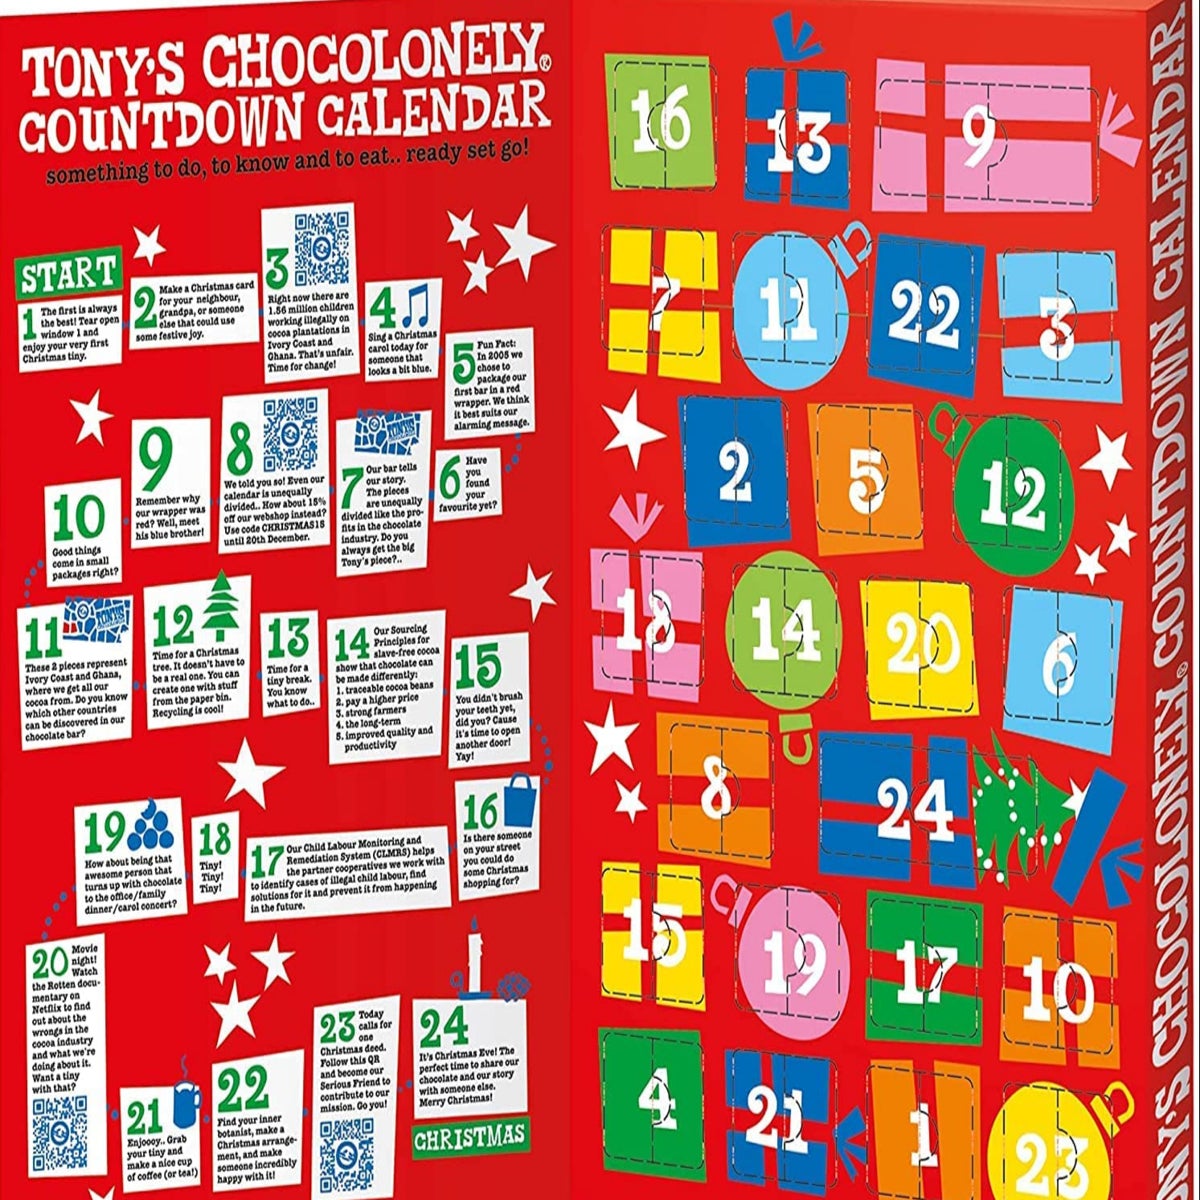 Tony's Chocolonely apologises for missing chocolate in advent calendar